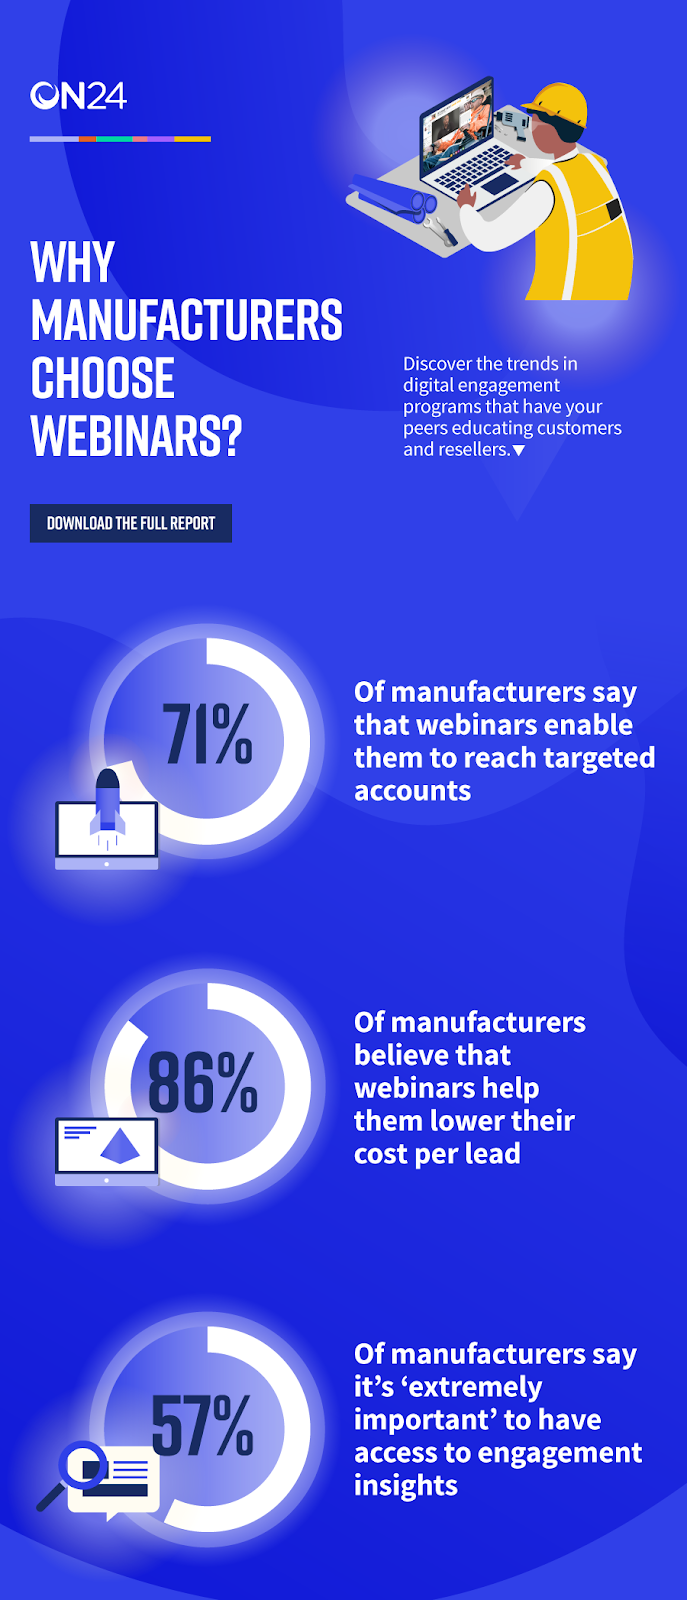 71% of manufacturers say webinars enable them to reach targeted accounts. 